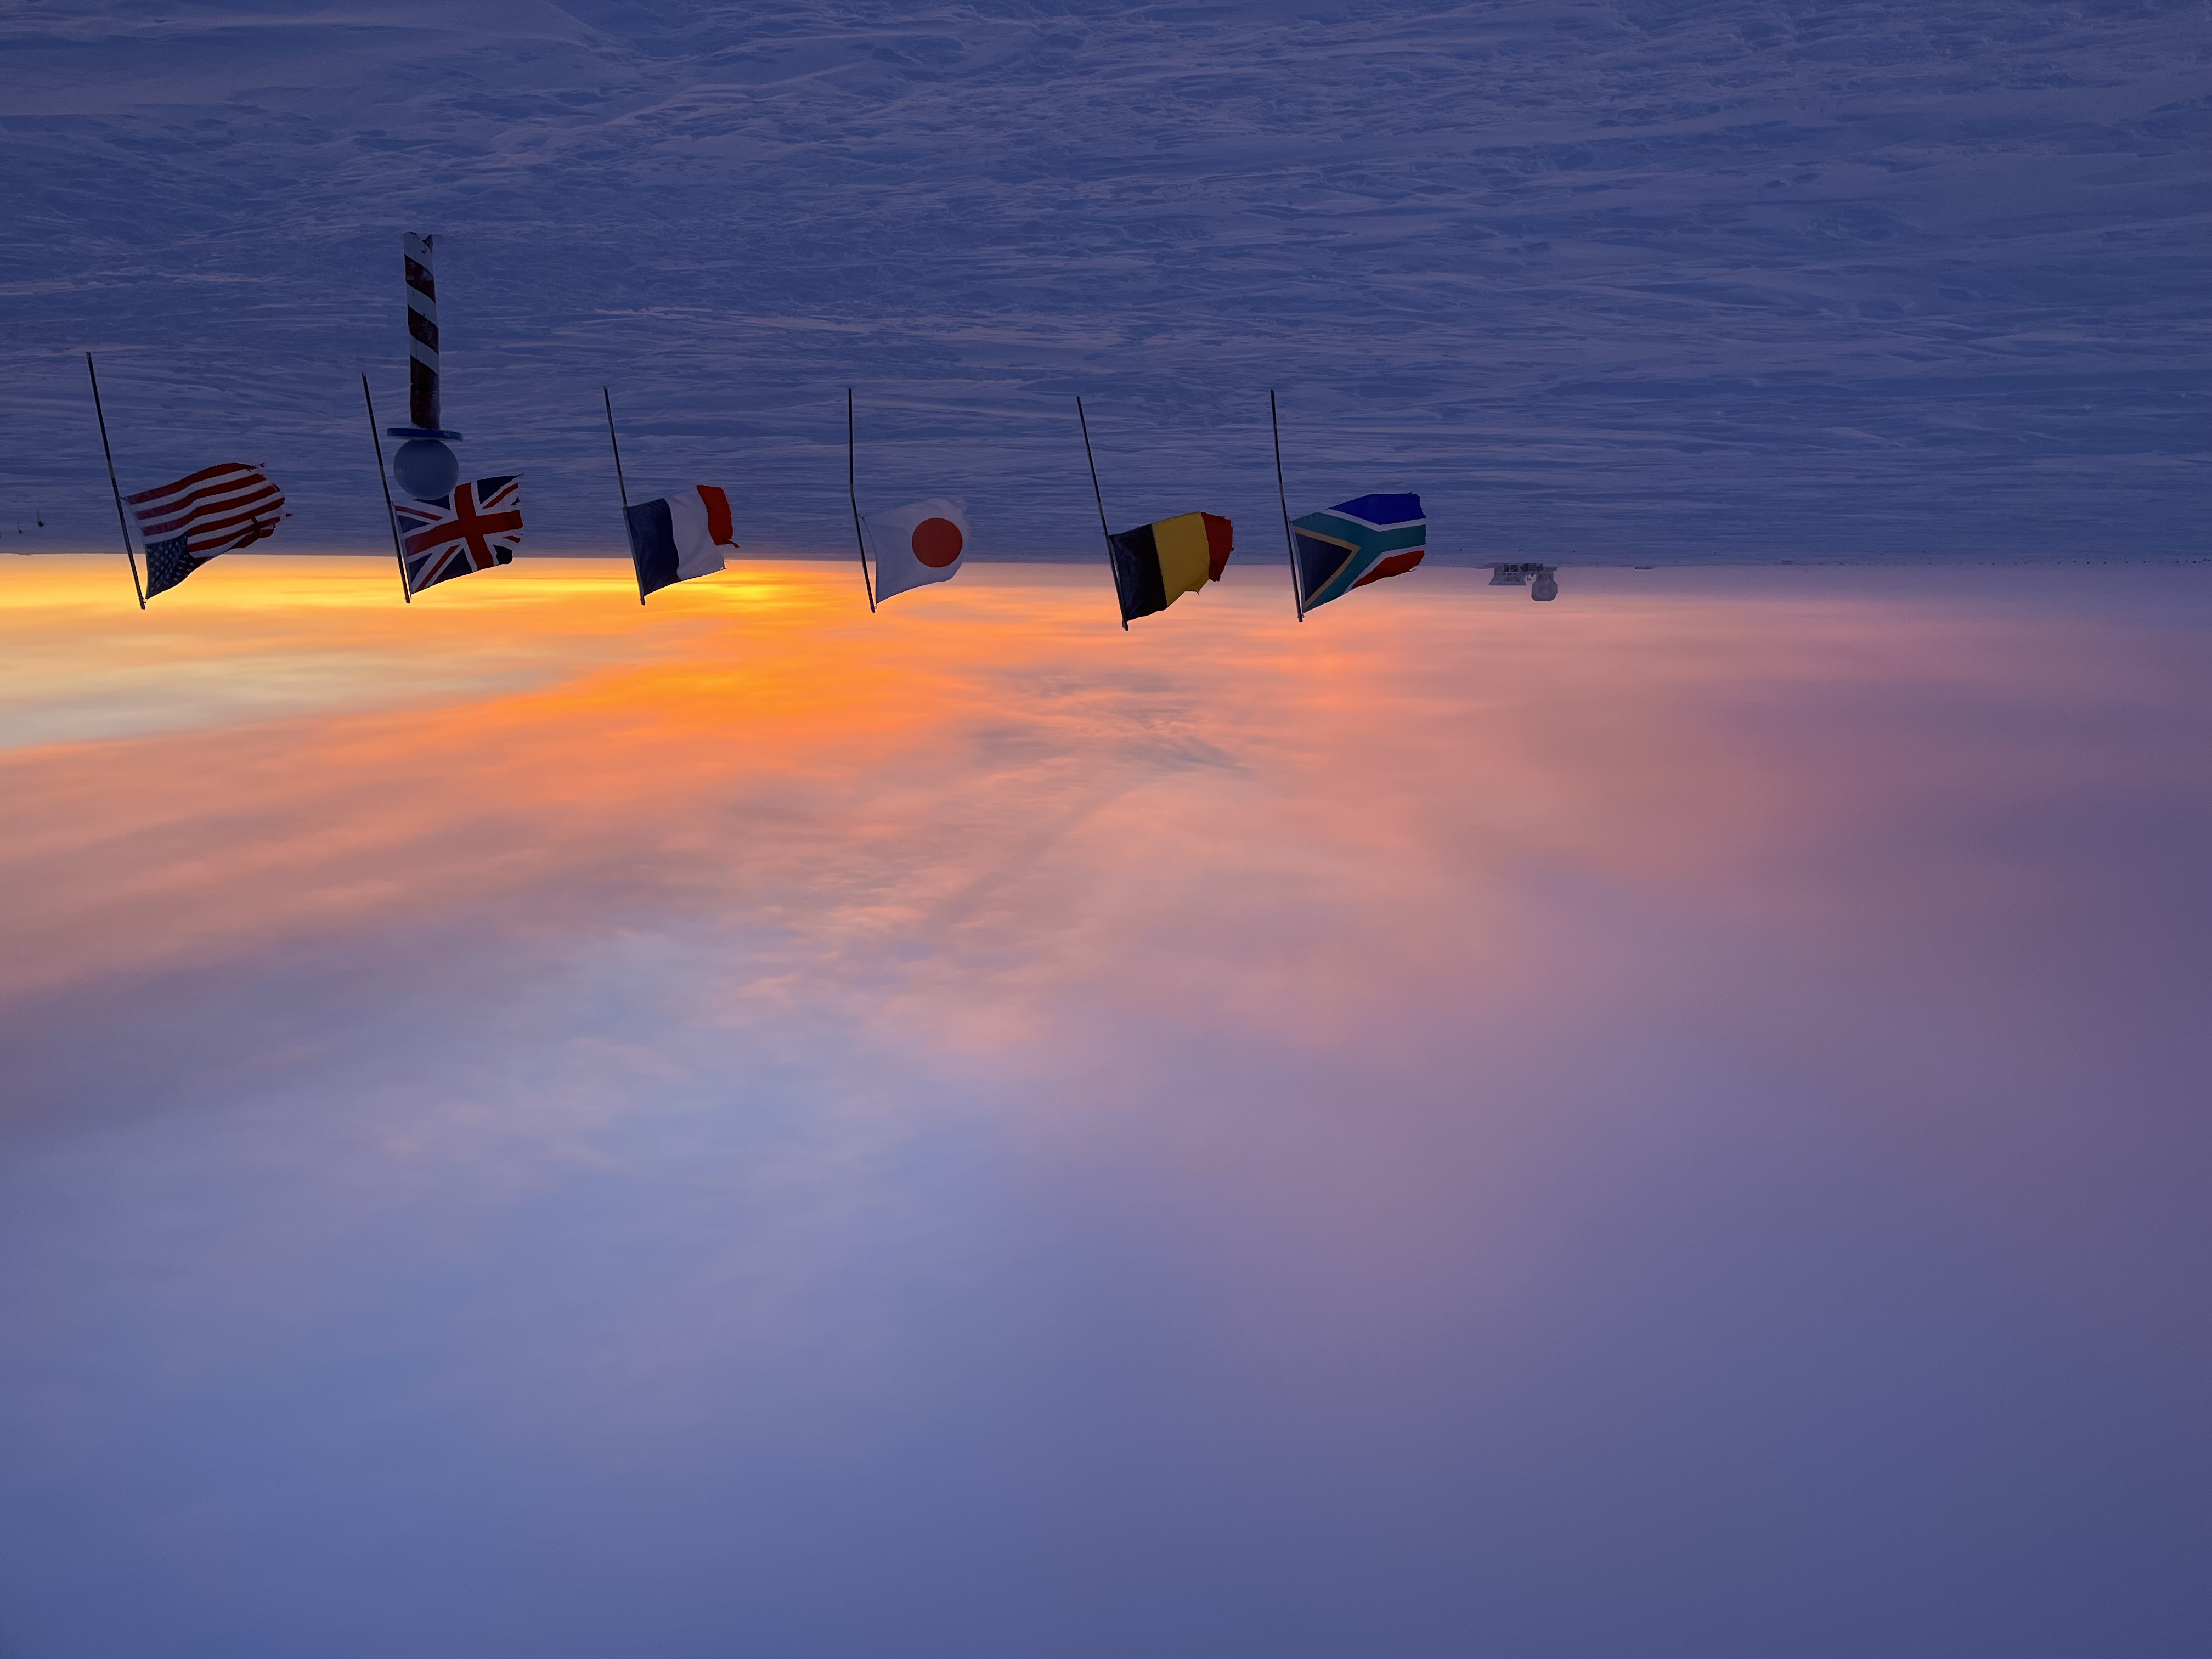 Faint light from the sun is visible on the horizon at the South Pole, across a vast stretch of snow with a row of flags across the forefront.